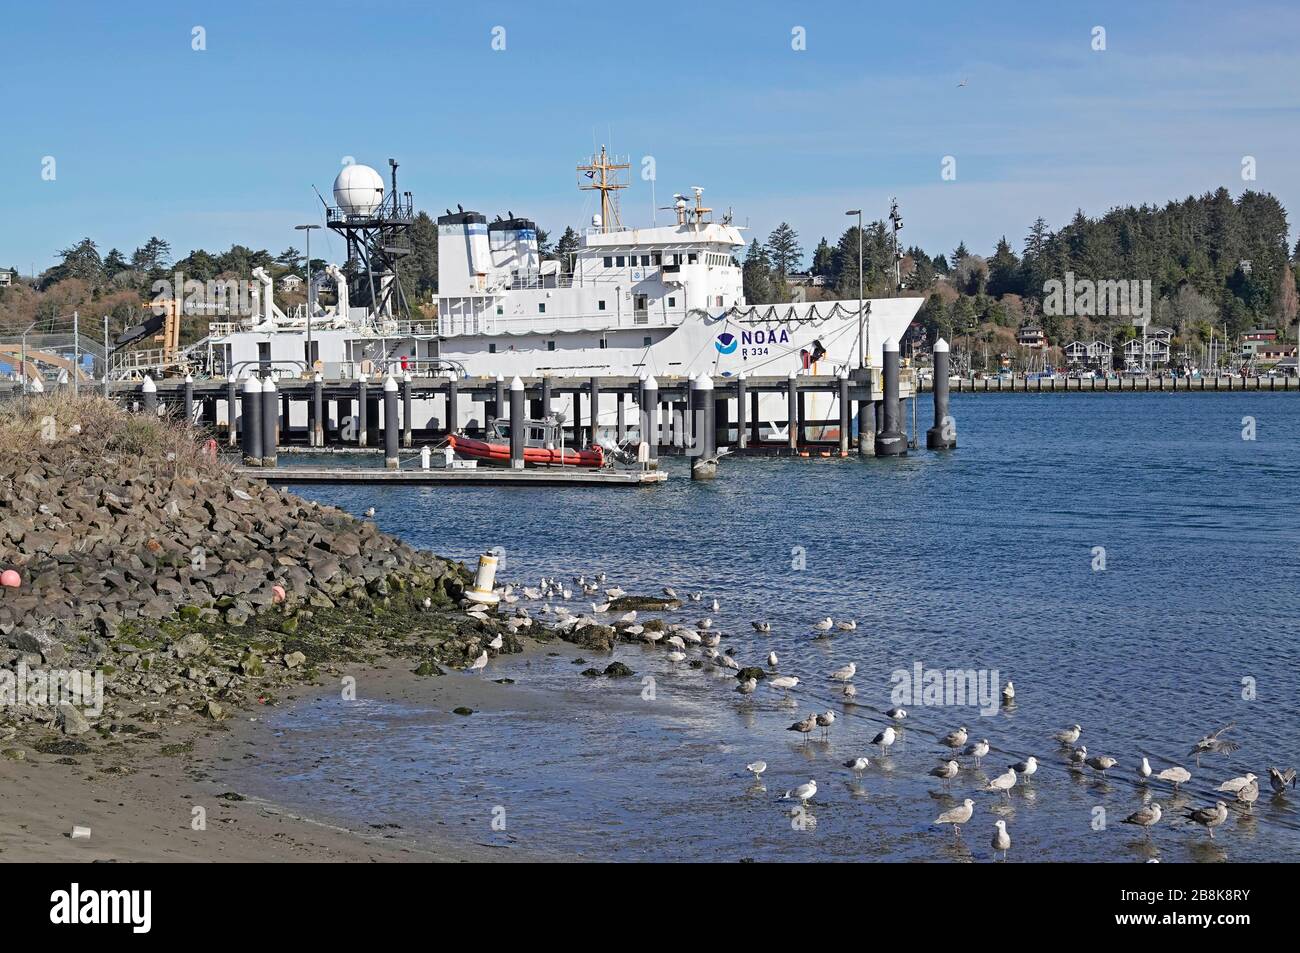 The NOAA (National Oceanic and Atmospheric Administration) ship Hi'ialakai (R 334), part of the Pacific Fleet stationed in Newport, Oregon. Stock Photo